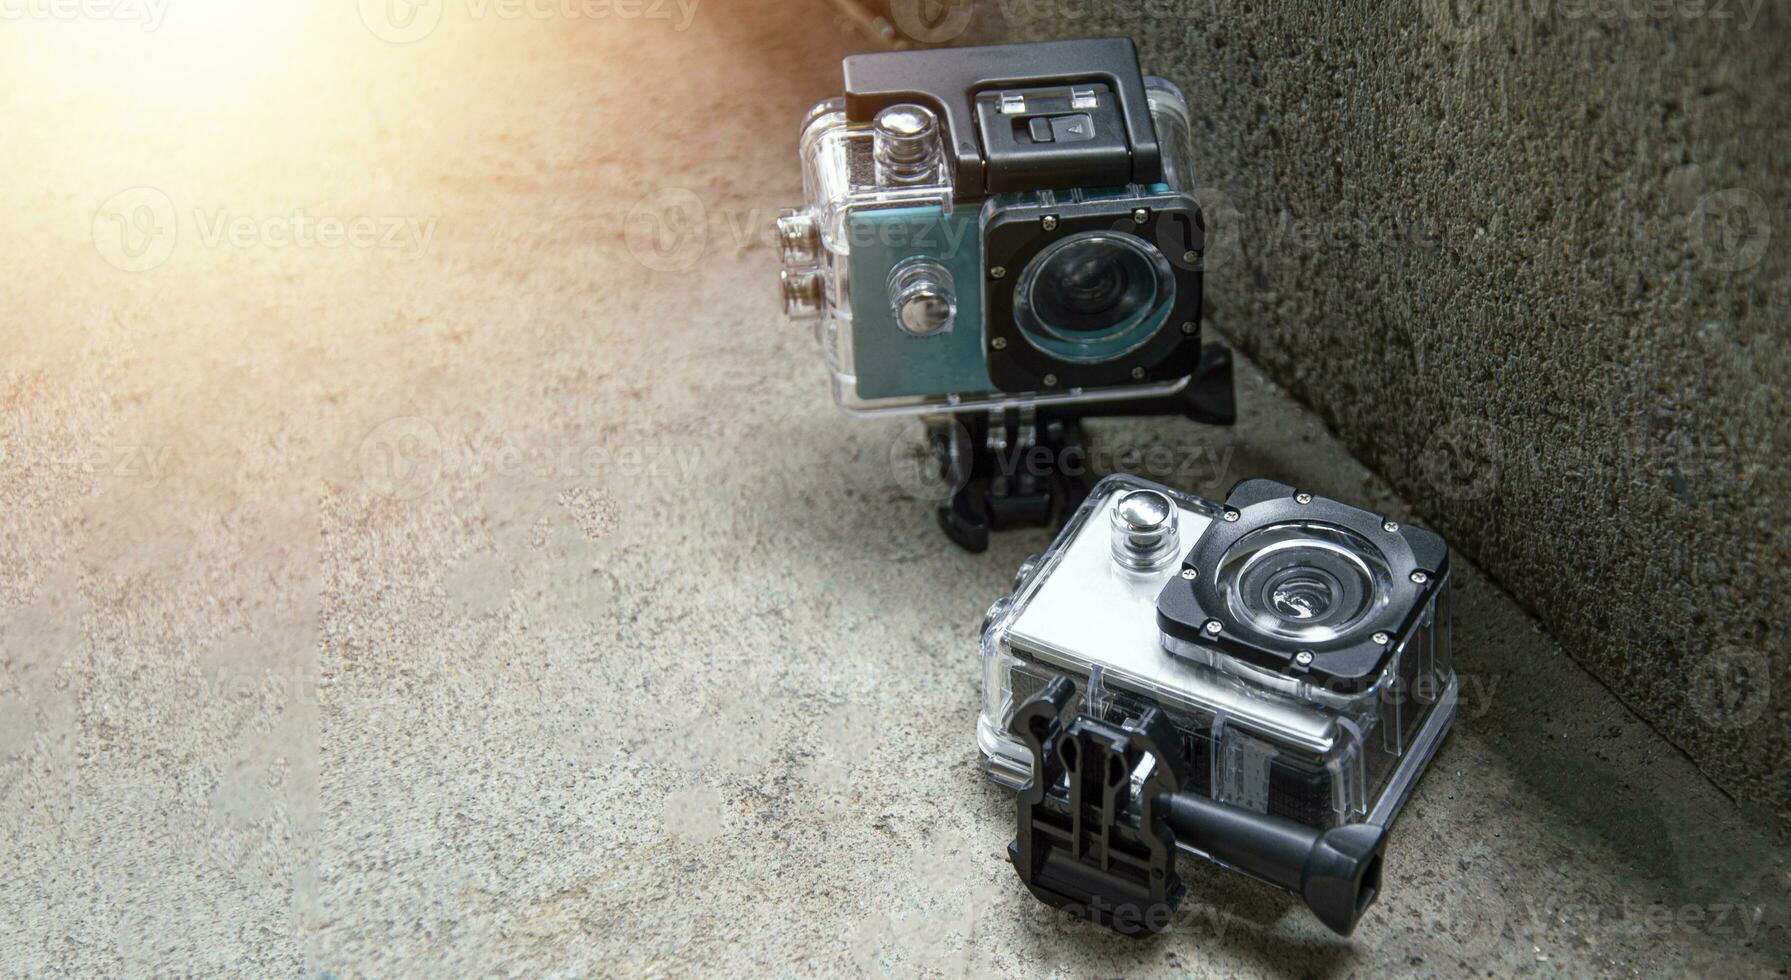 2 action cams placed on the floor, waterproof and dustproof photo